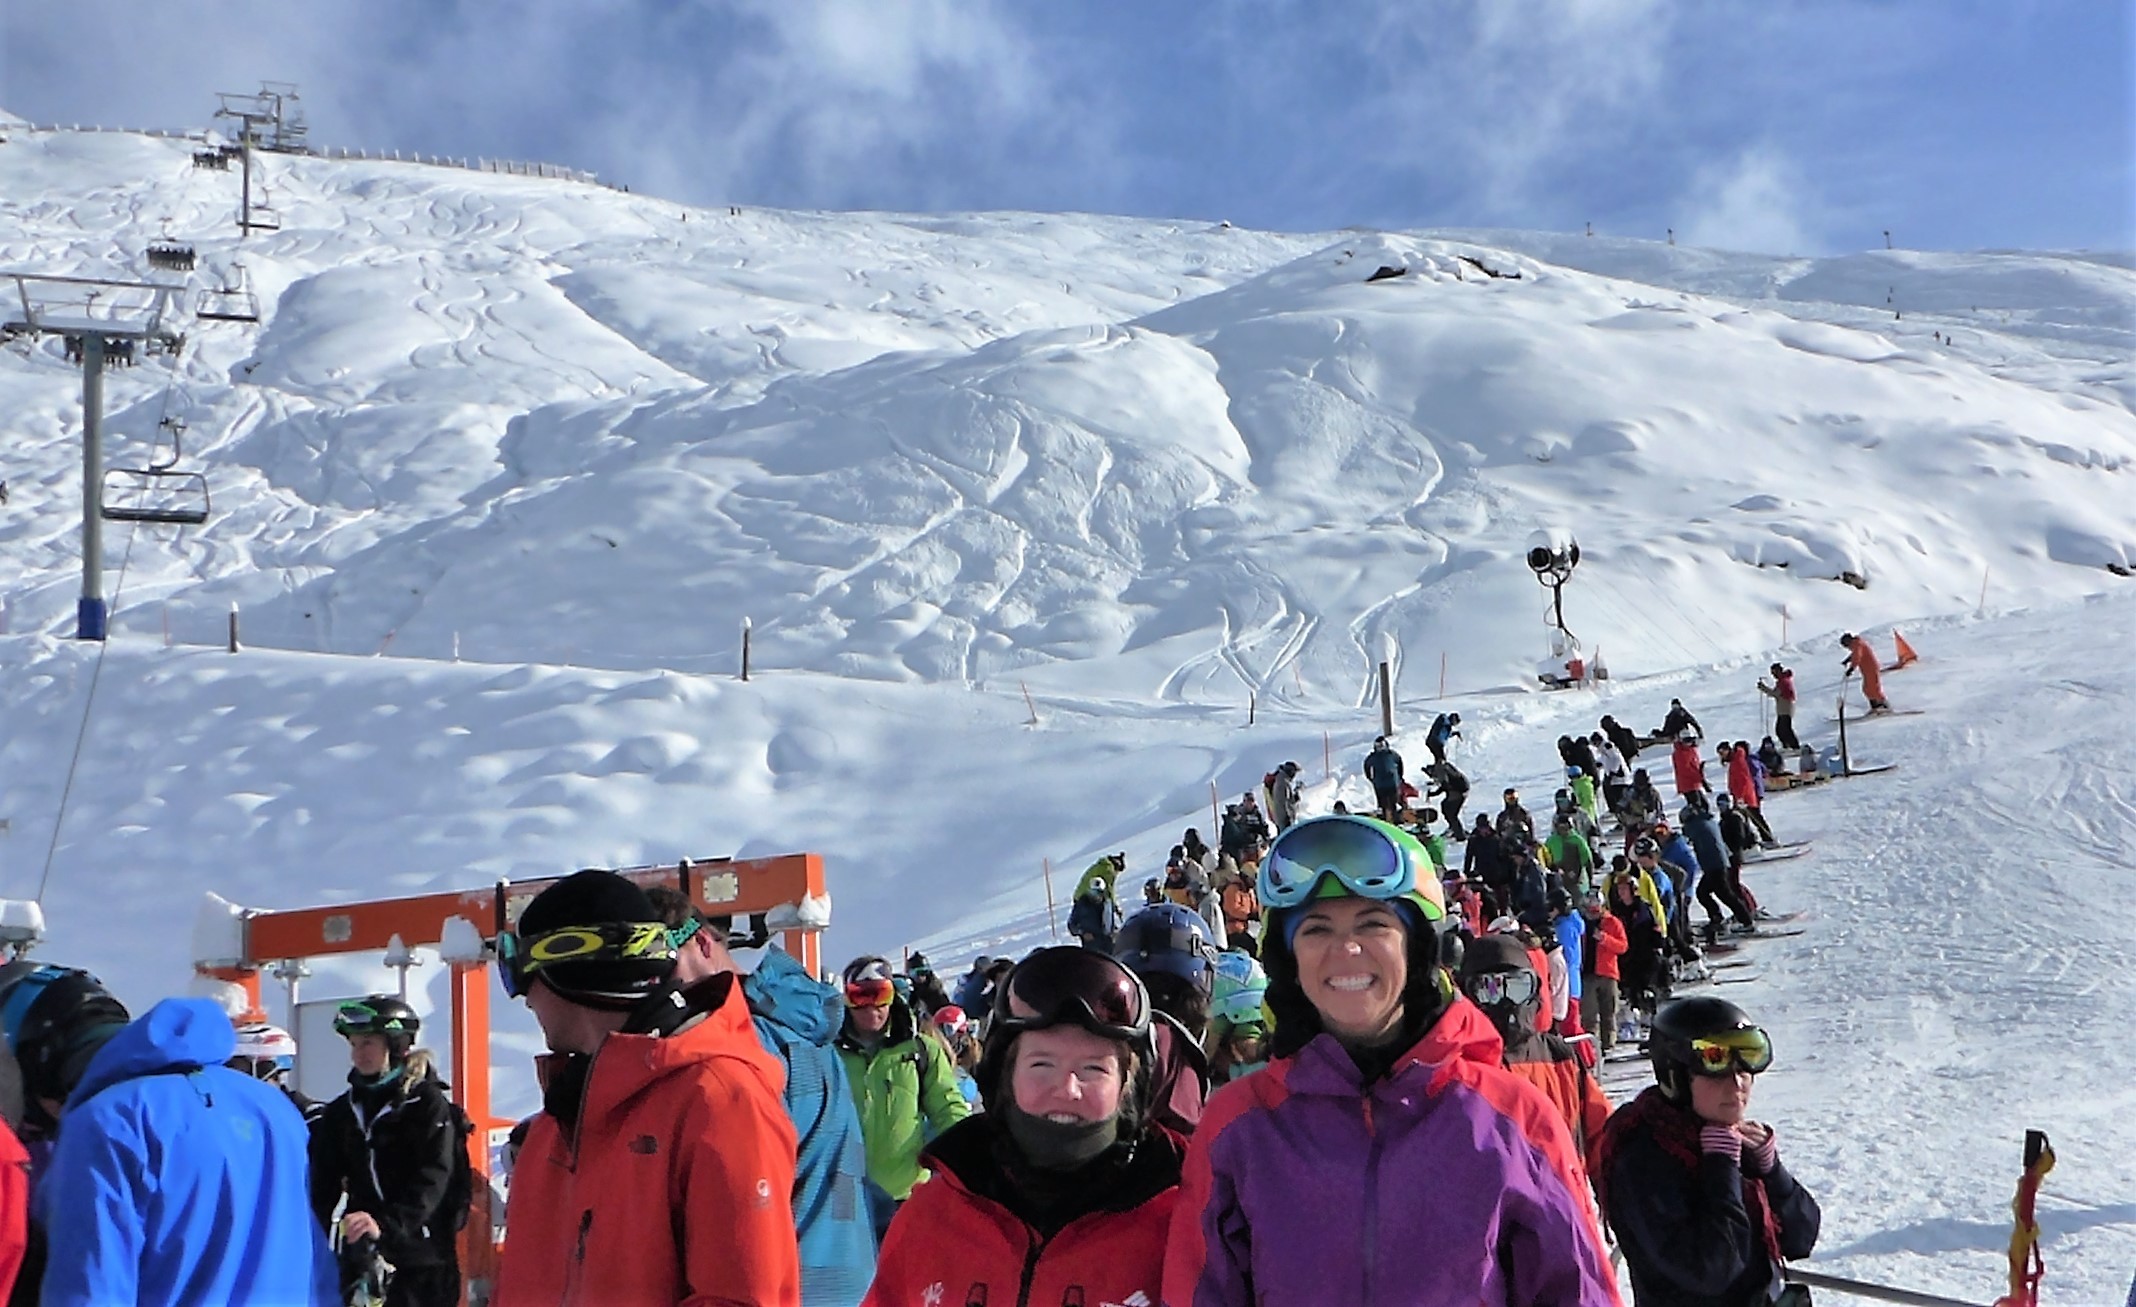 Worth the line - epic snow in the Home Basin